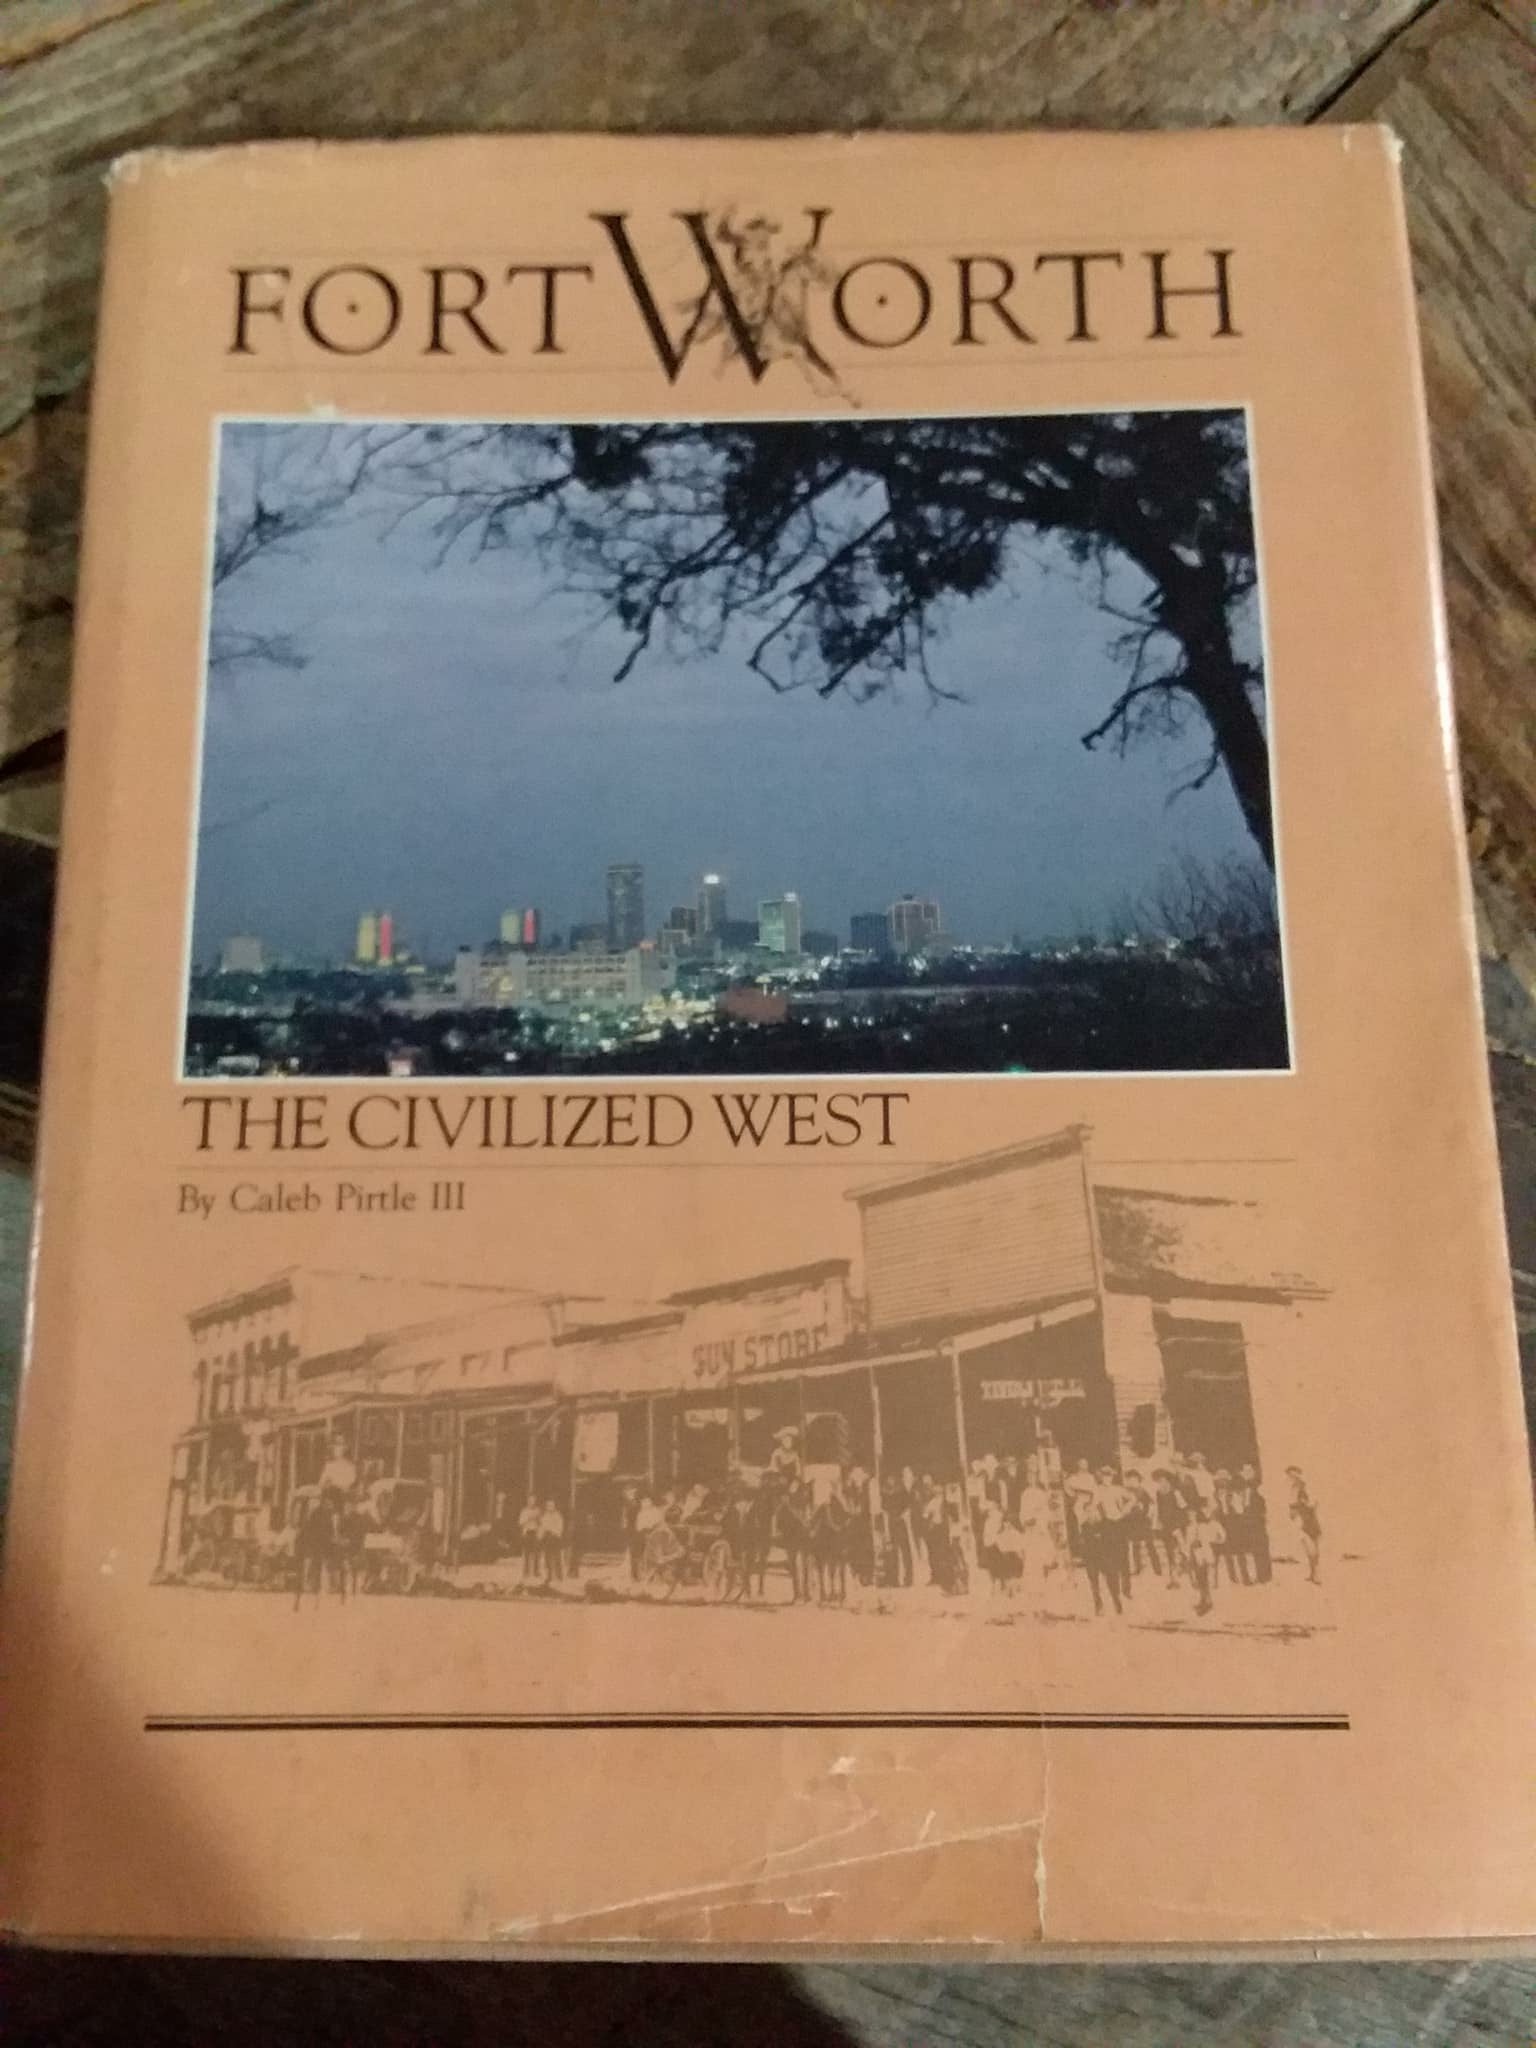 Fort Worth Hardcover Book